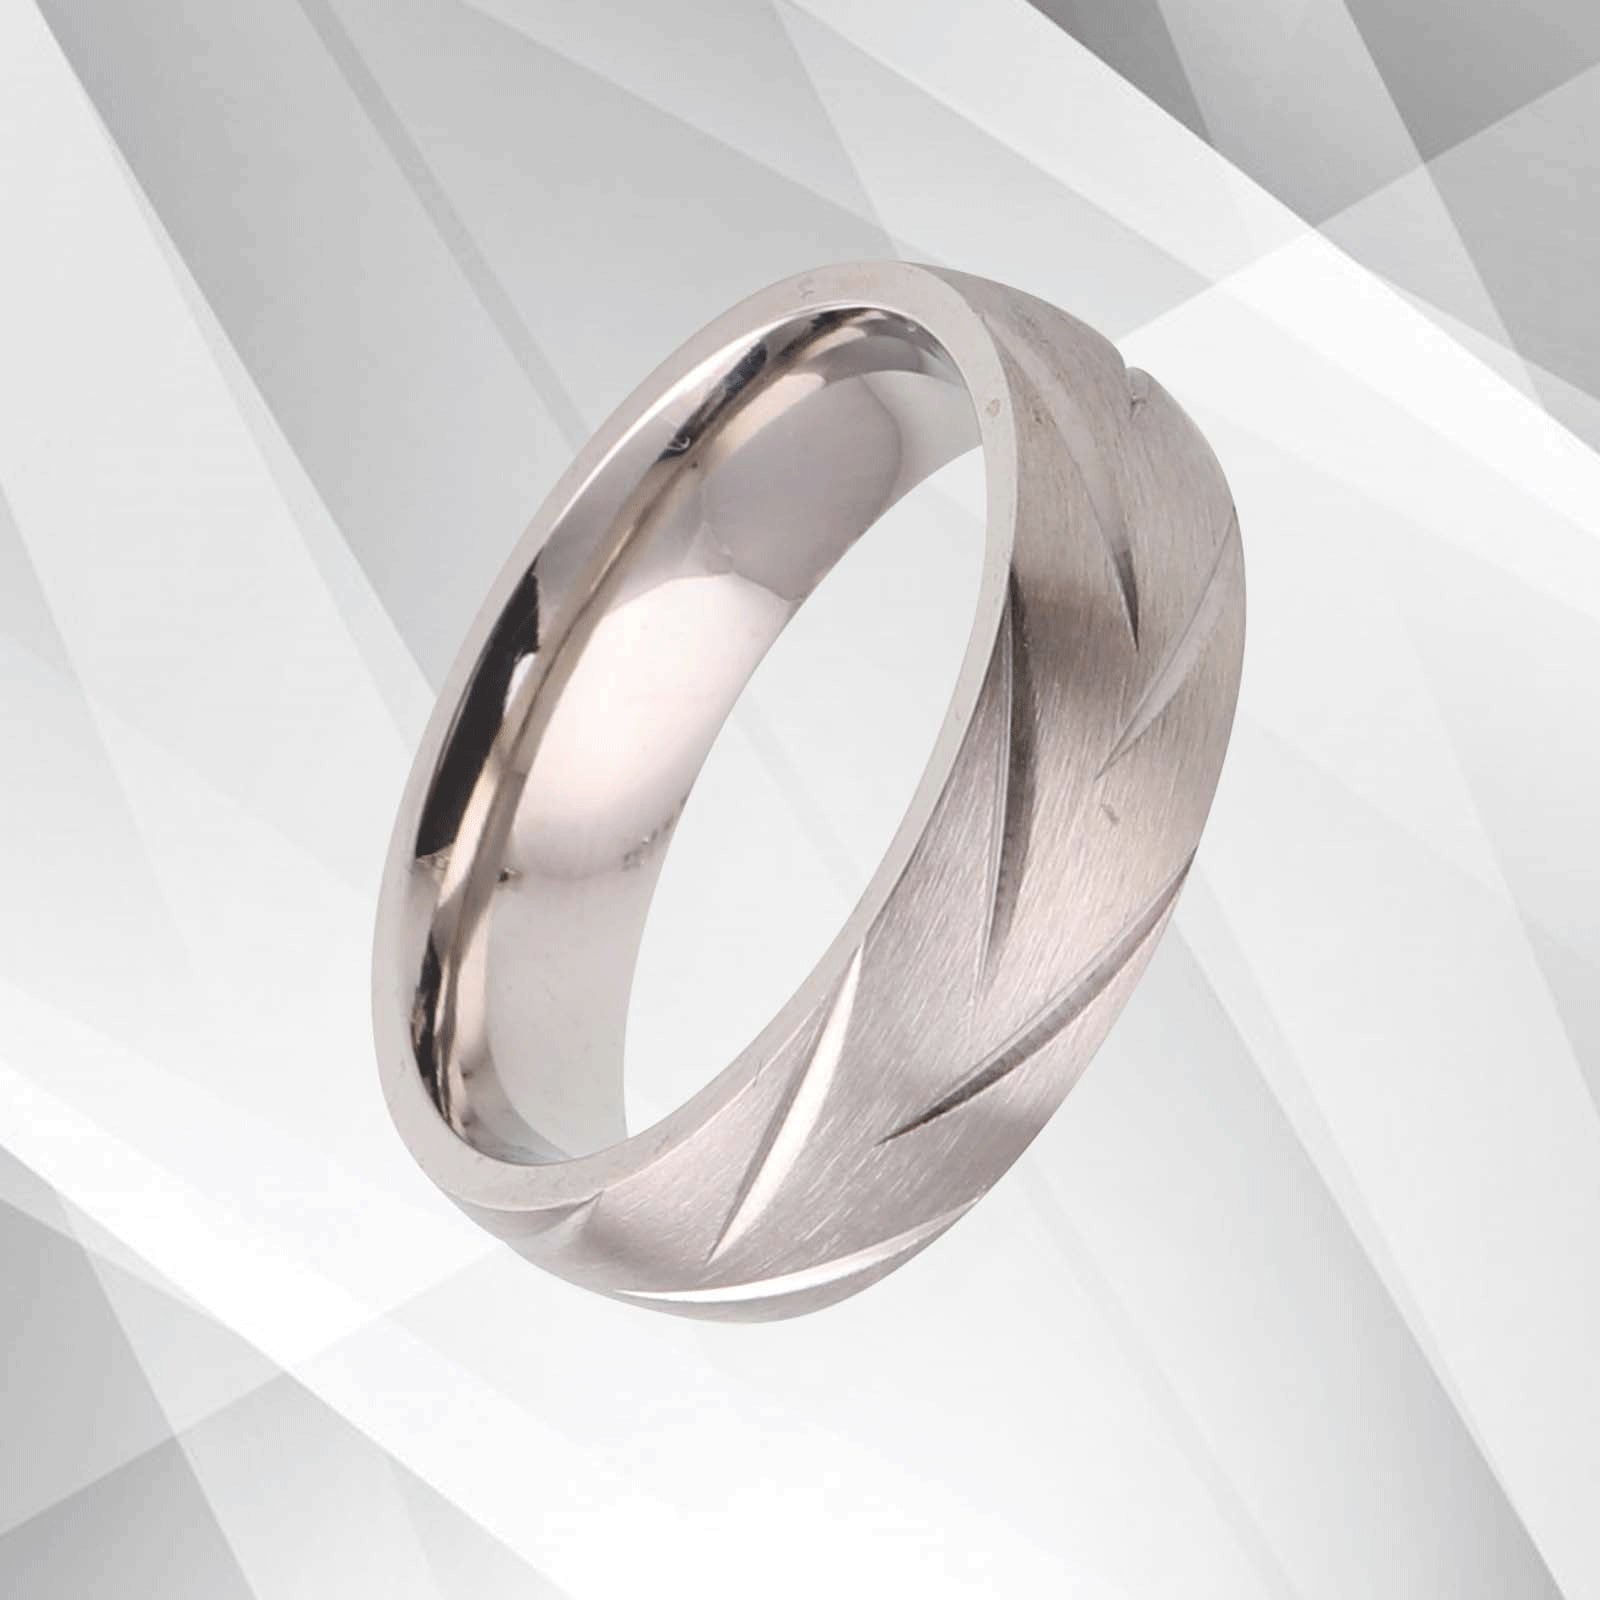 6mm Titanium and White Gold Plated Wedding Band Ring - Comfort Fit for Men's Engagement and Anniversary Gift Bijou Her